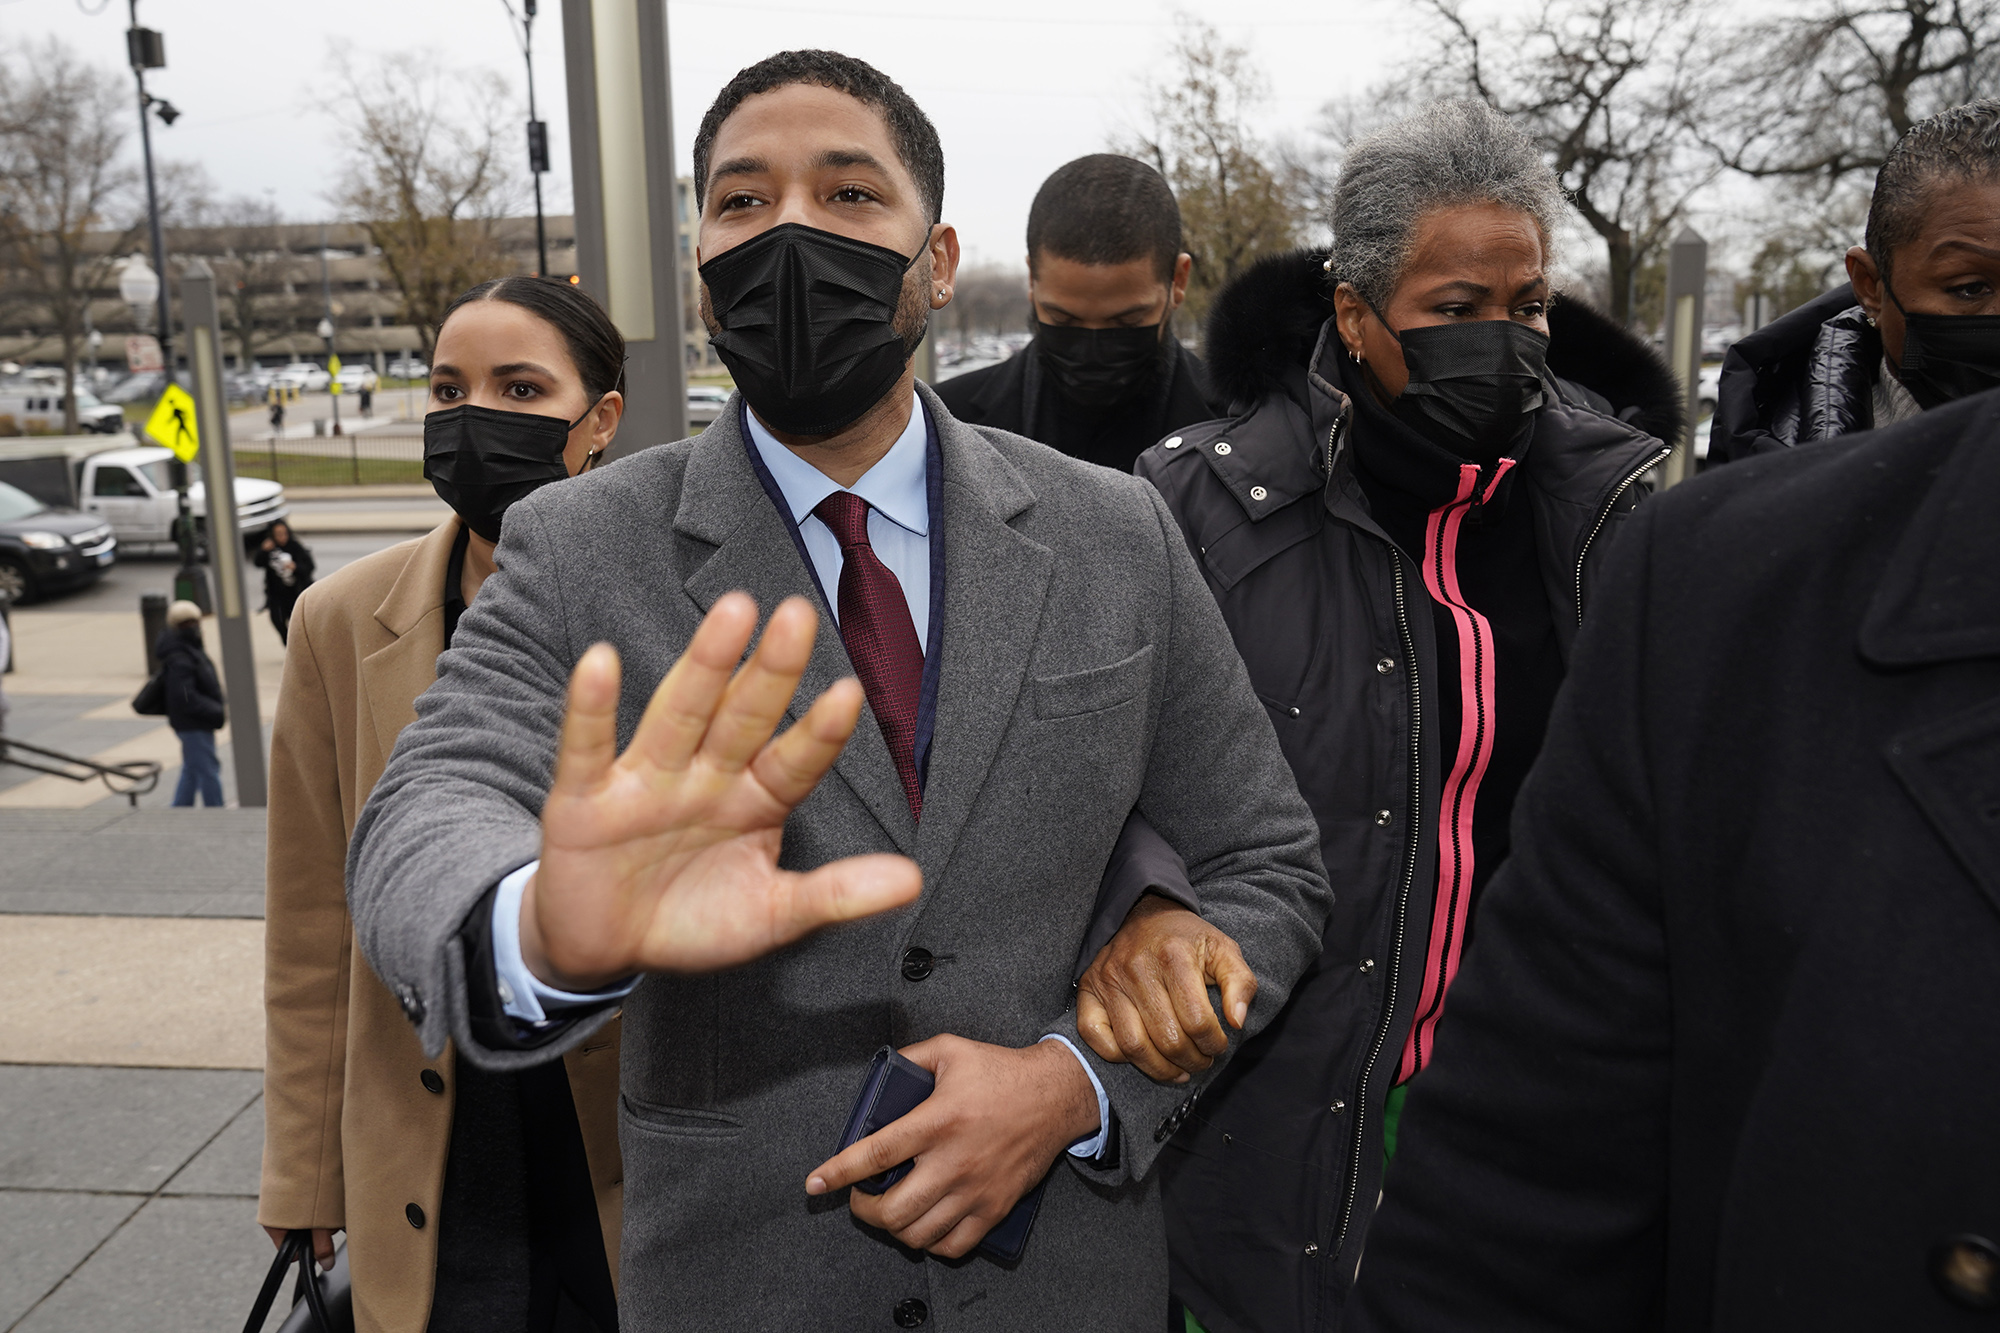 Actor Jussie Smollett asks photographers to move back as he arrives with his mother Janet, right, at the Leighton Criminal Courthouse for day three of his trial in Chicago on Wednesday, Dec. 1, 2021.